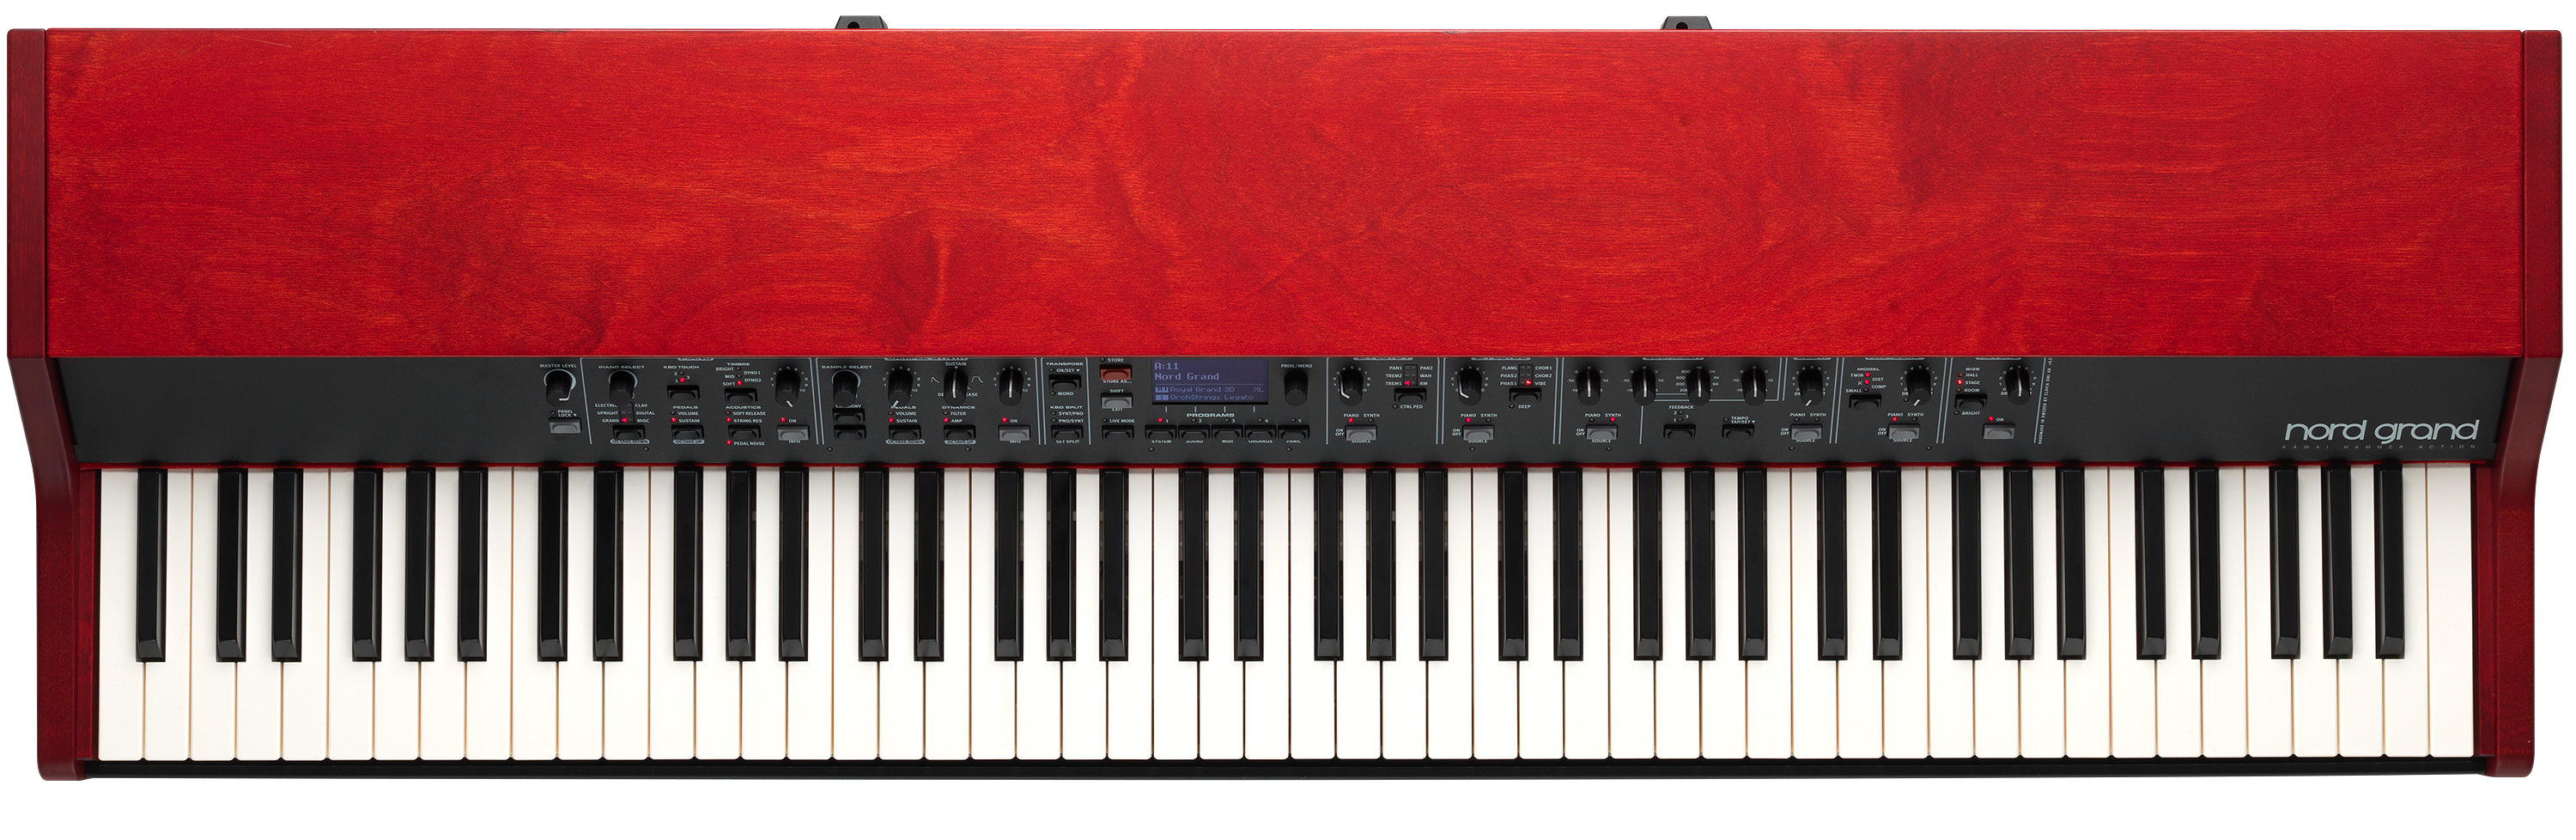 Nord Grand Stagepiano